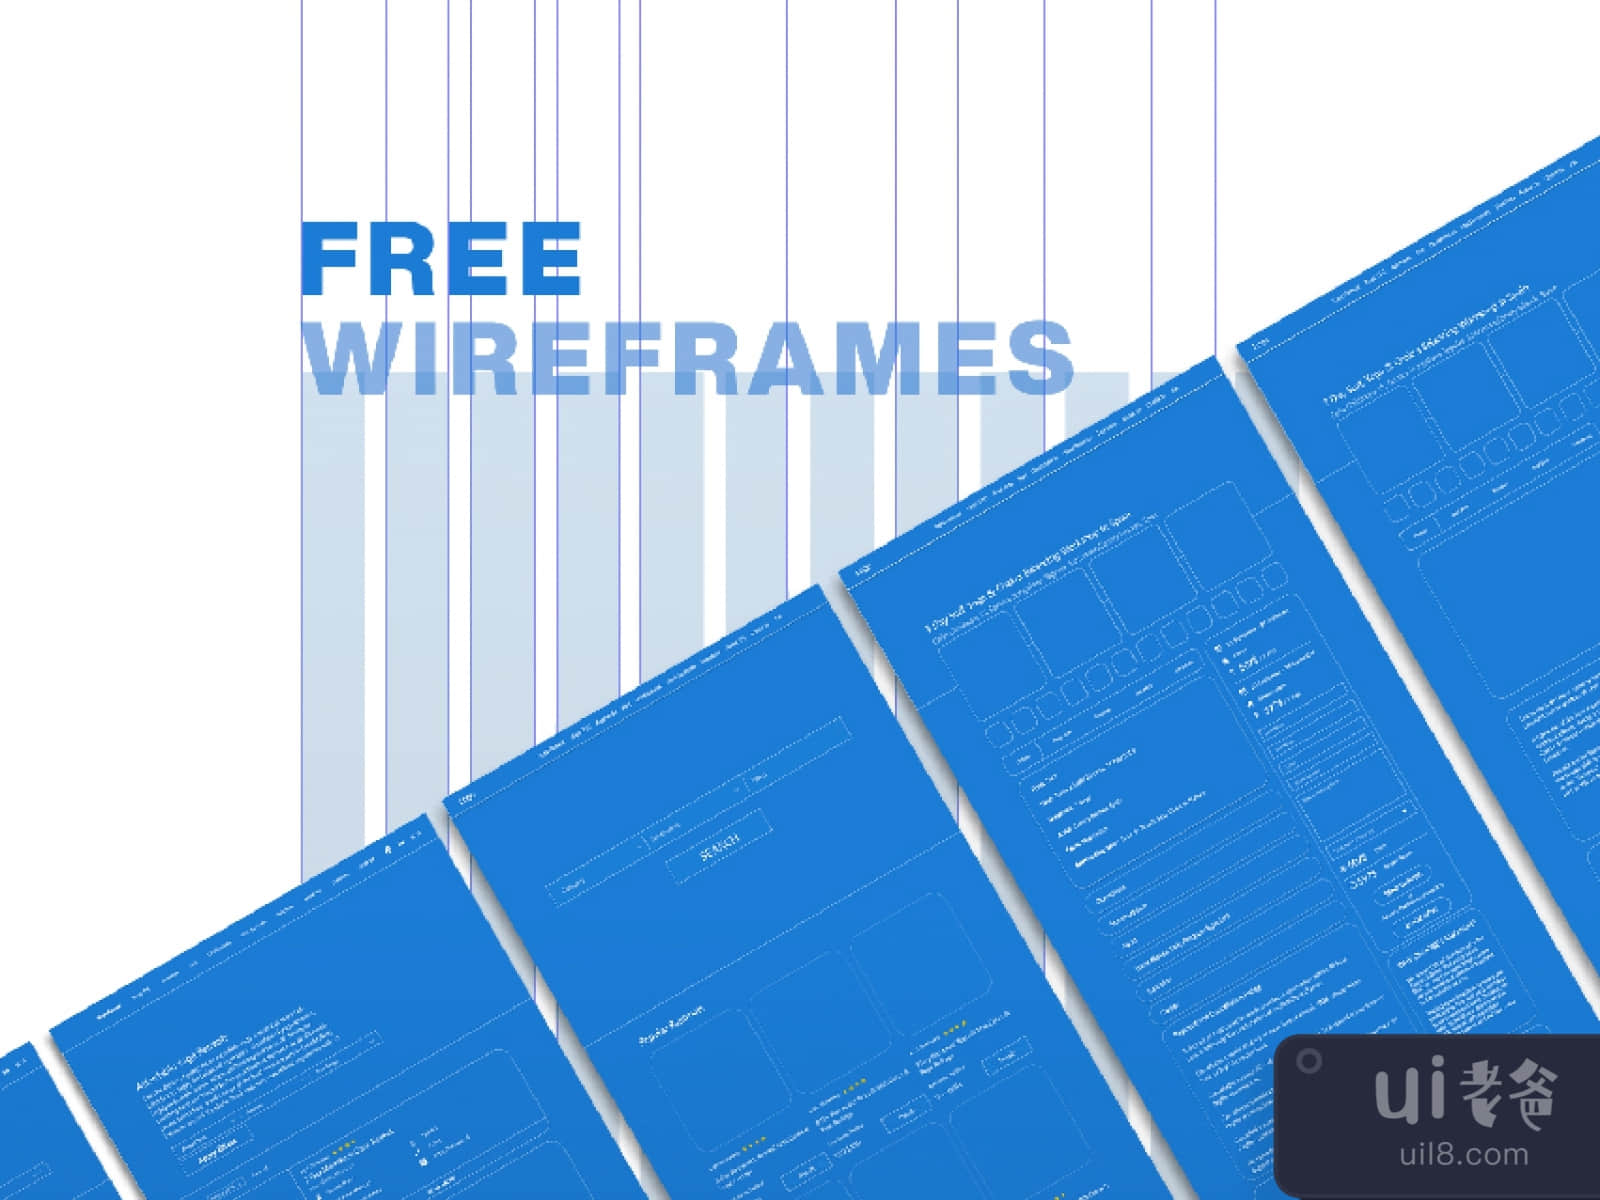 Website Wireframes UI Kit for Figma and Adobe XD No 1